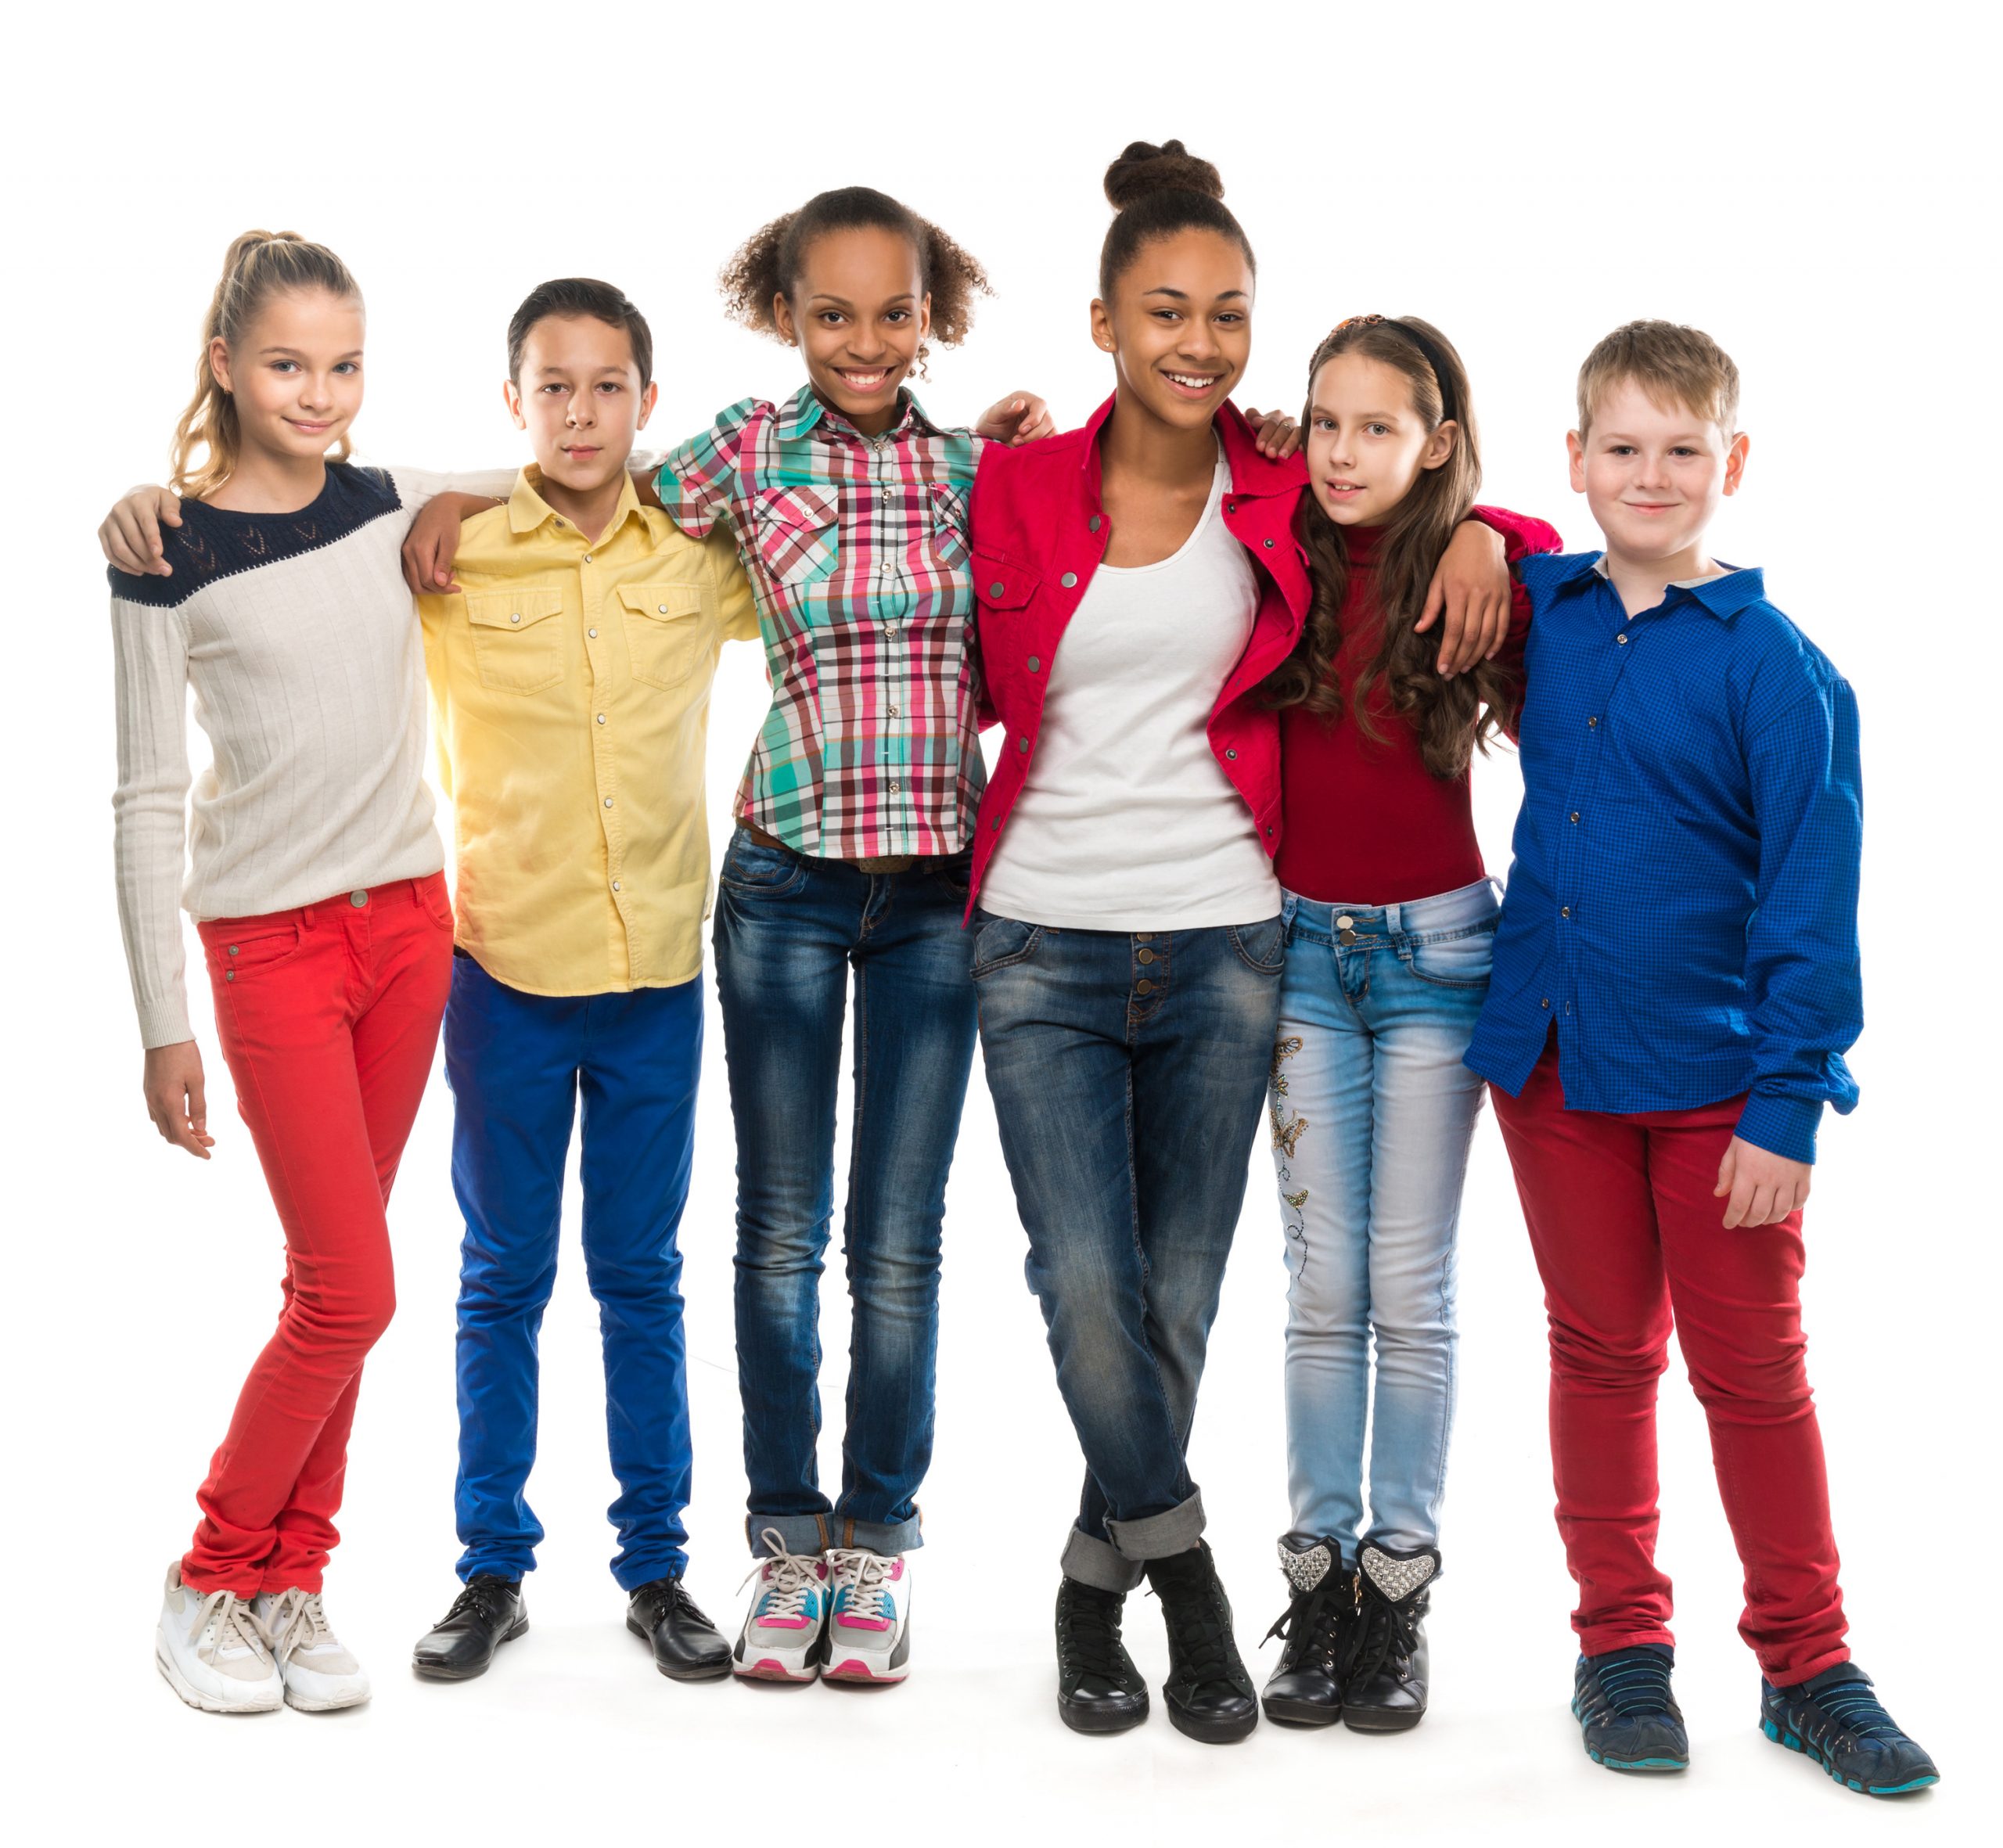 a group of children with different complexion embracing isolated on white background